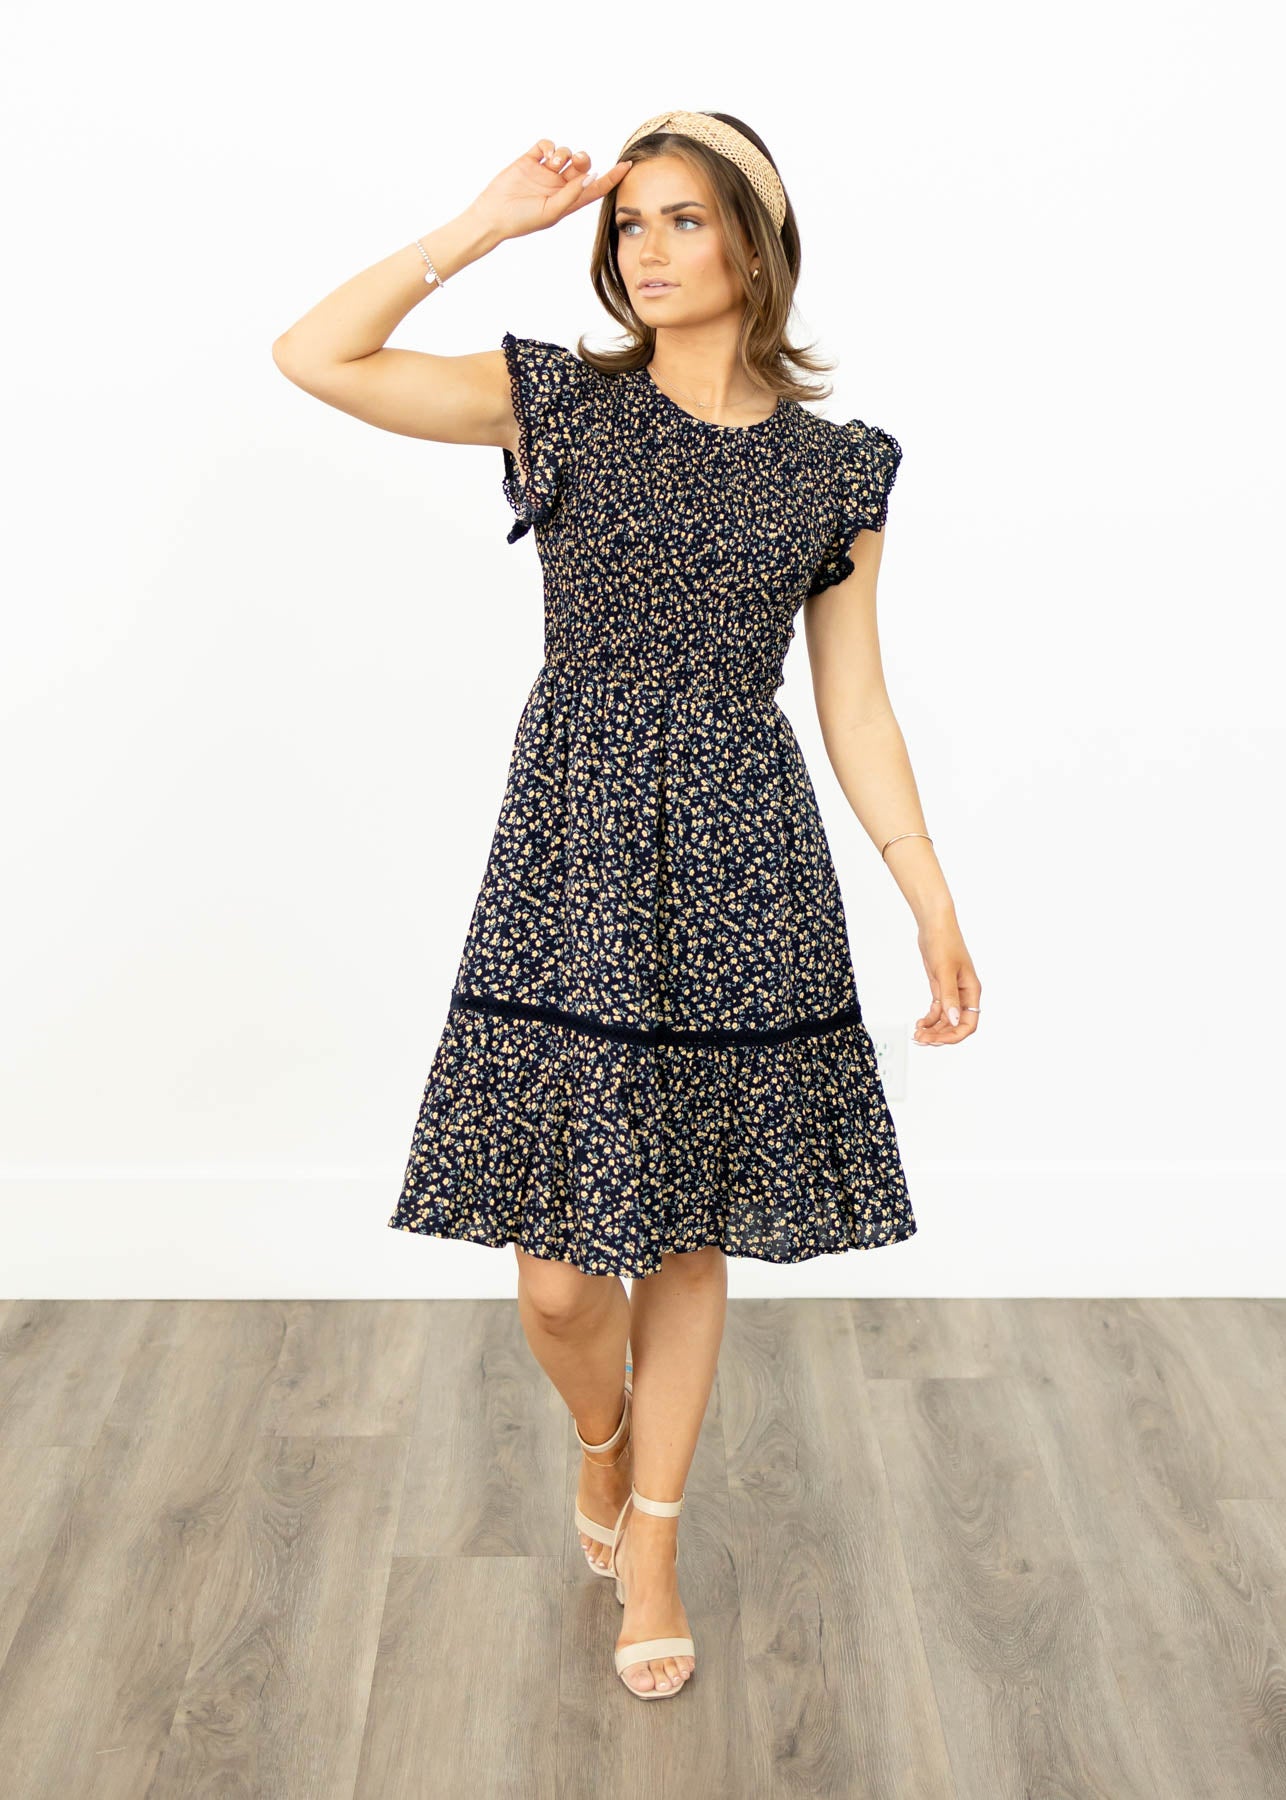 Short sleeve navy floral dress with ruffle sleeves